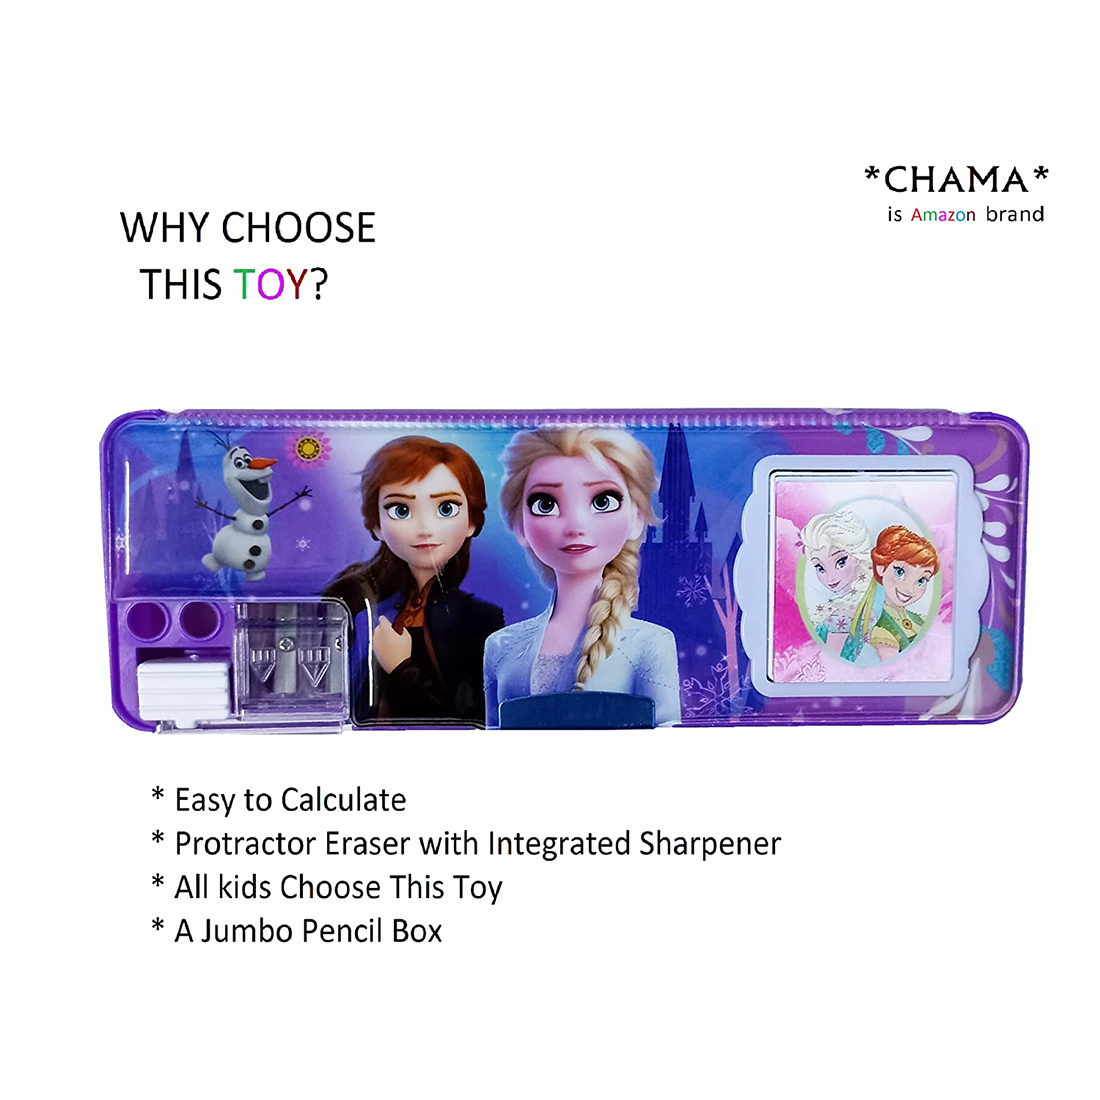 Royal Toys Magnetic Pencil Box with Calculator & Dual Sharpener for Kids  for School,Barbie Big Size Cartoon Printed Pencil Case for Kids by Chama  Enterprise ( Frozen )Plastic, Pack of 1 |